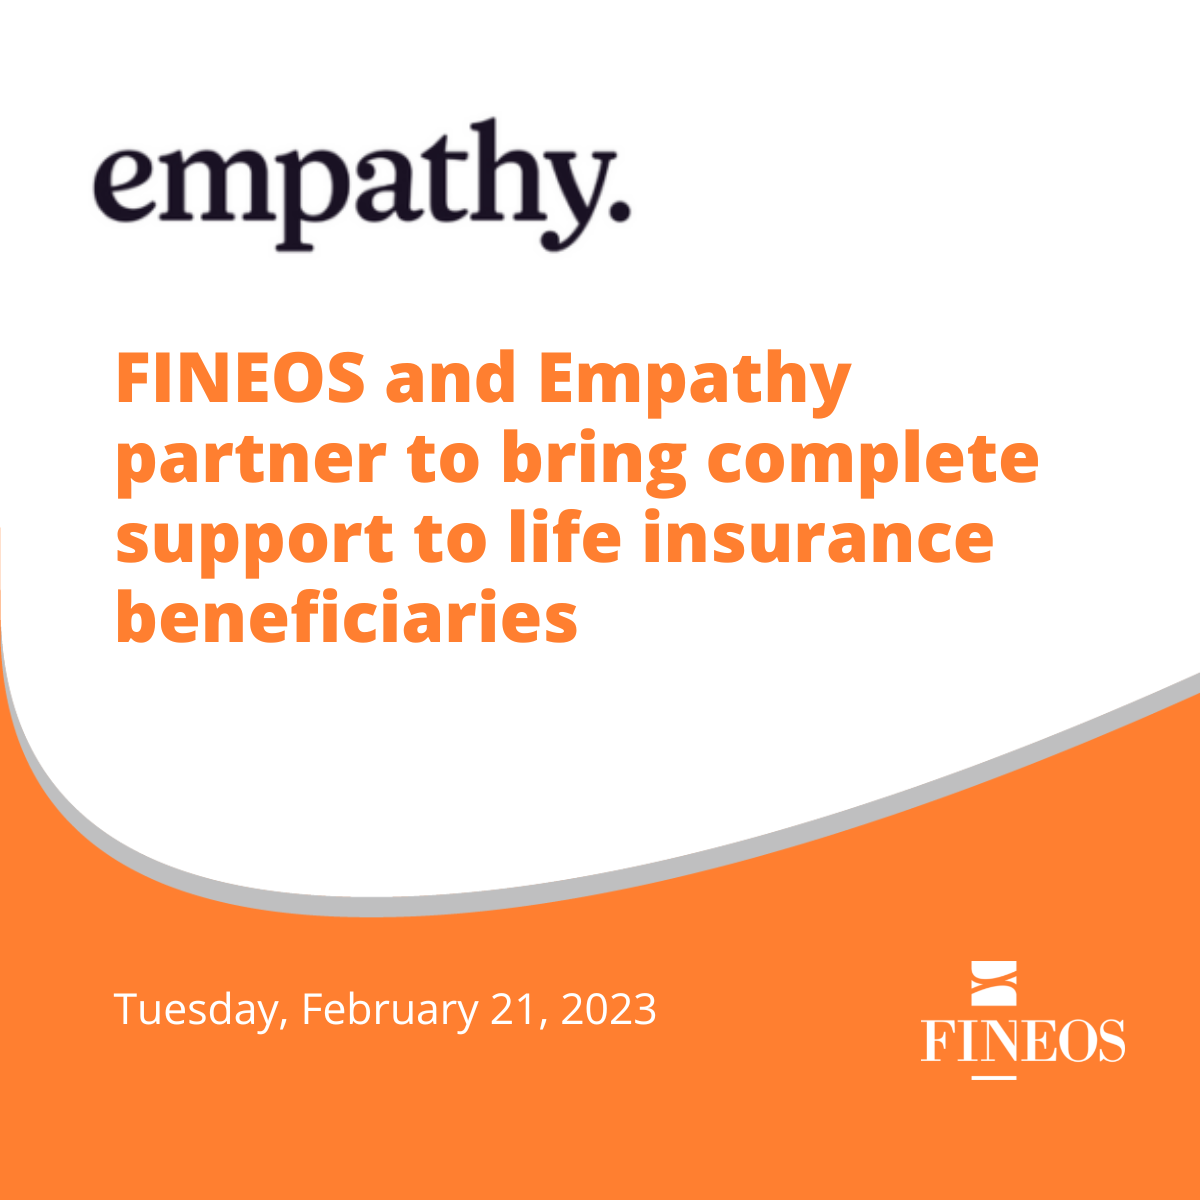 FINEOS and Empathy partner to bring complete support to life insurance beneficiaries